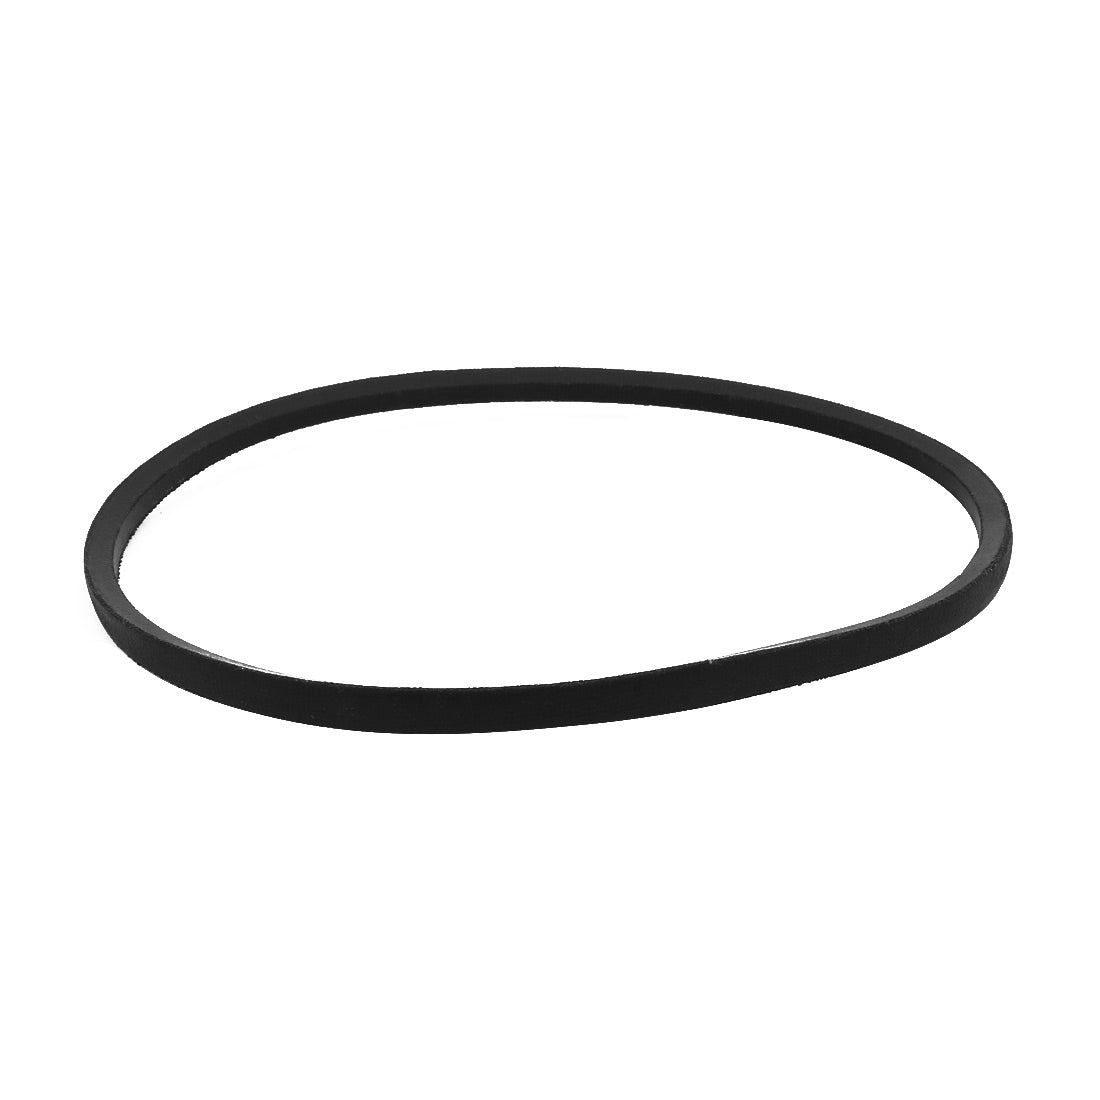 uxcell Uxcell O-600 Rubber Transmission Drive Belt V-Belt 10mm Wide 6mm Thick for Washing Machine